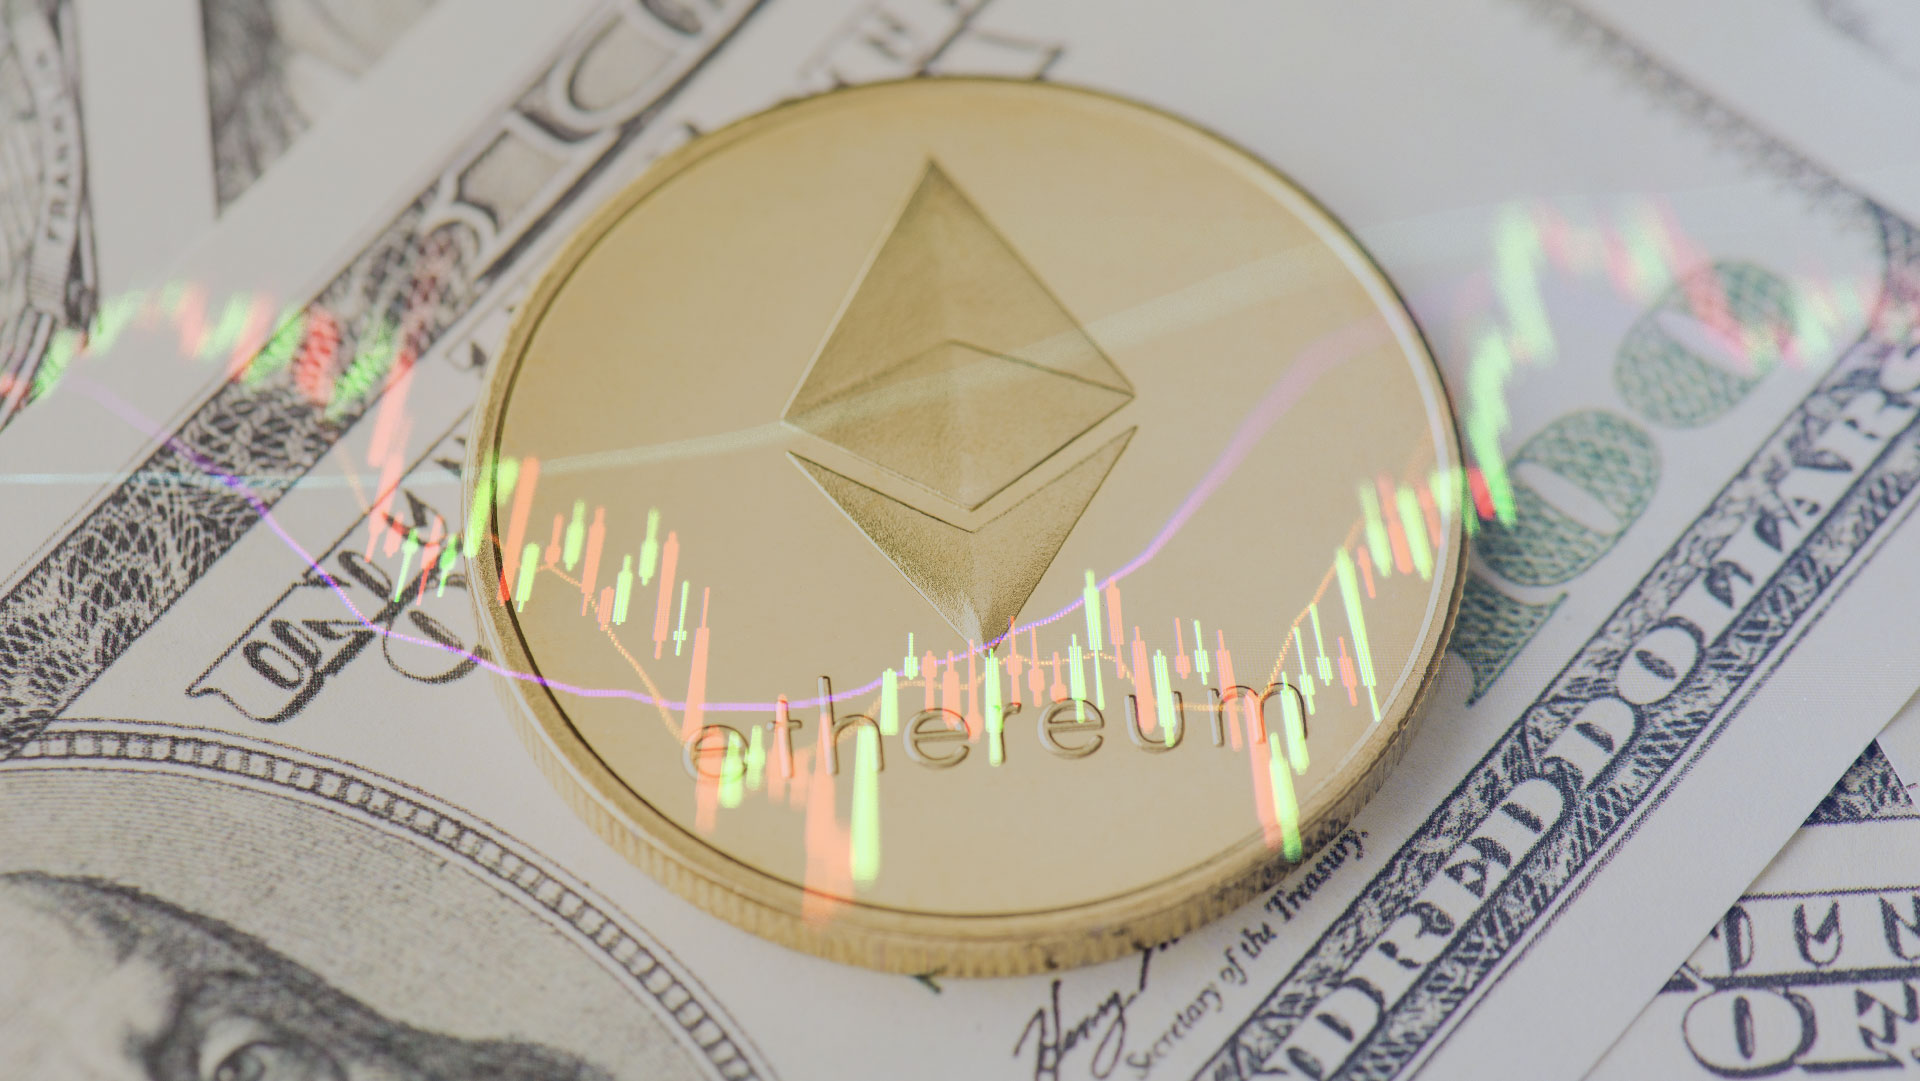 how to buy ethereum under 18